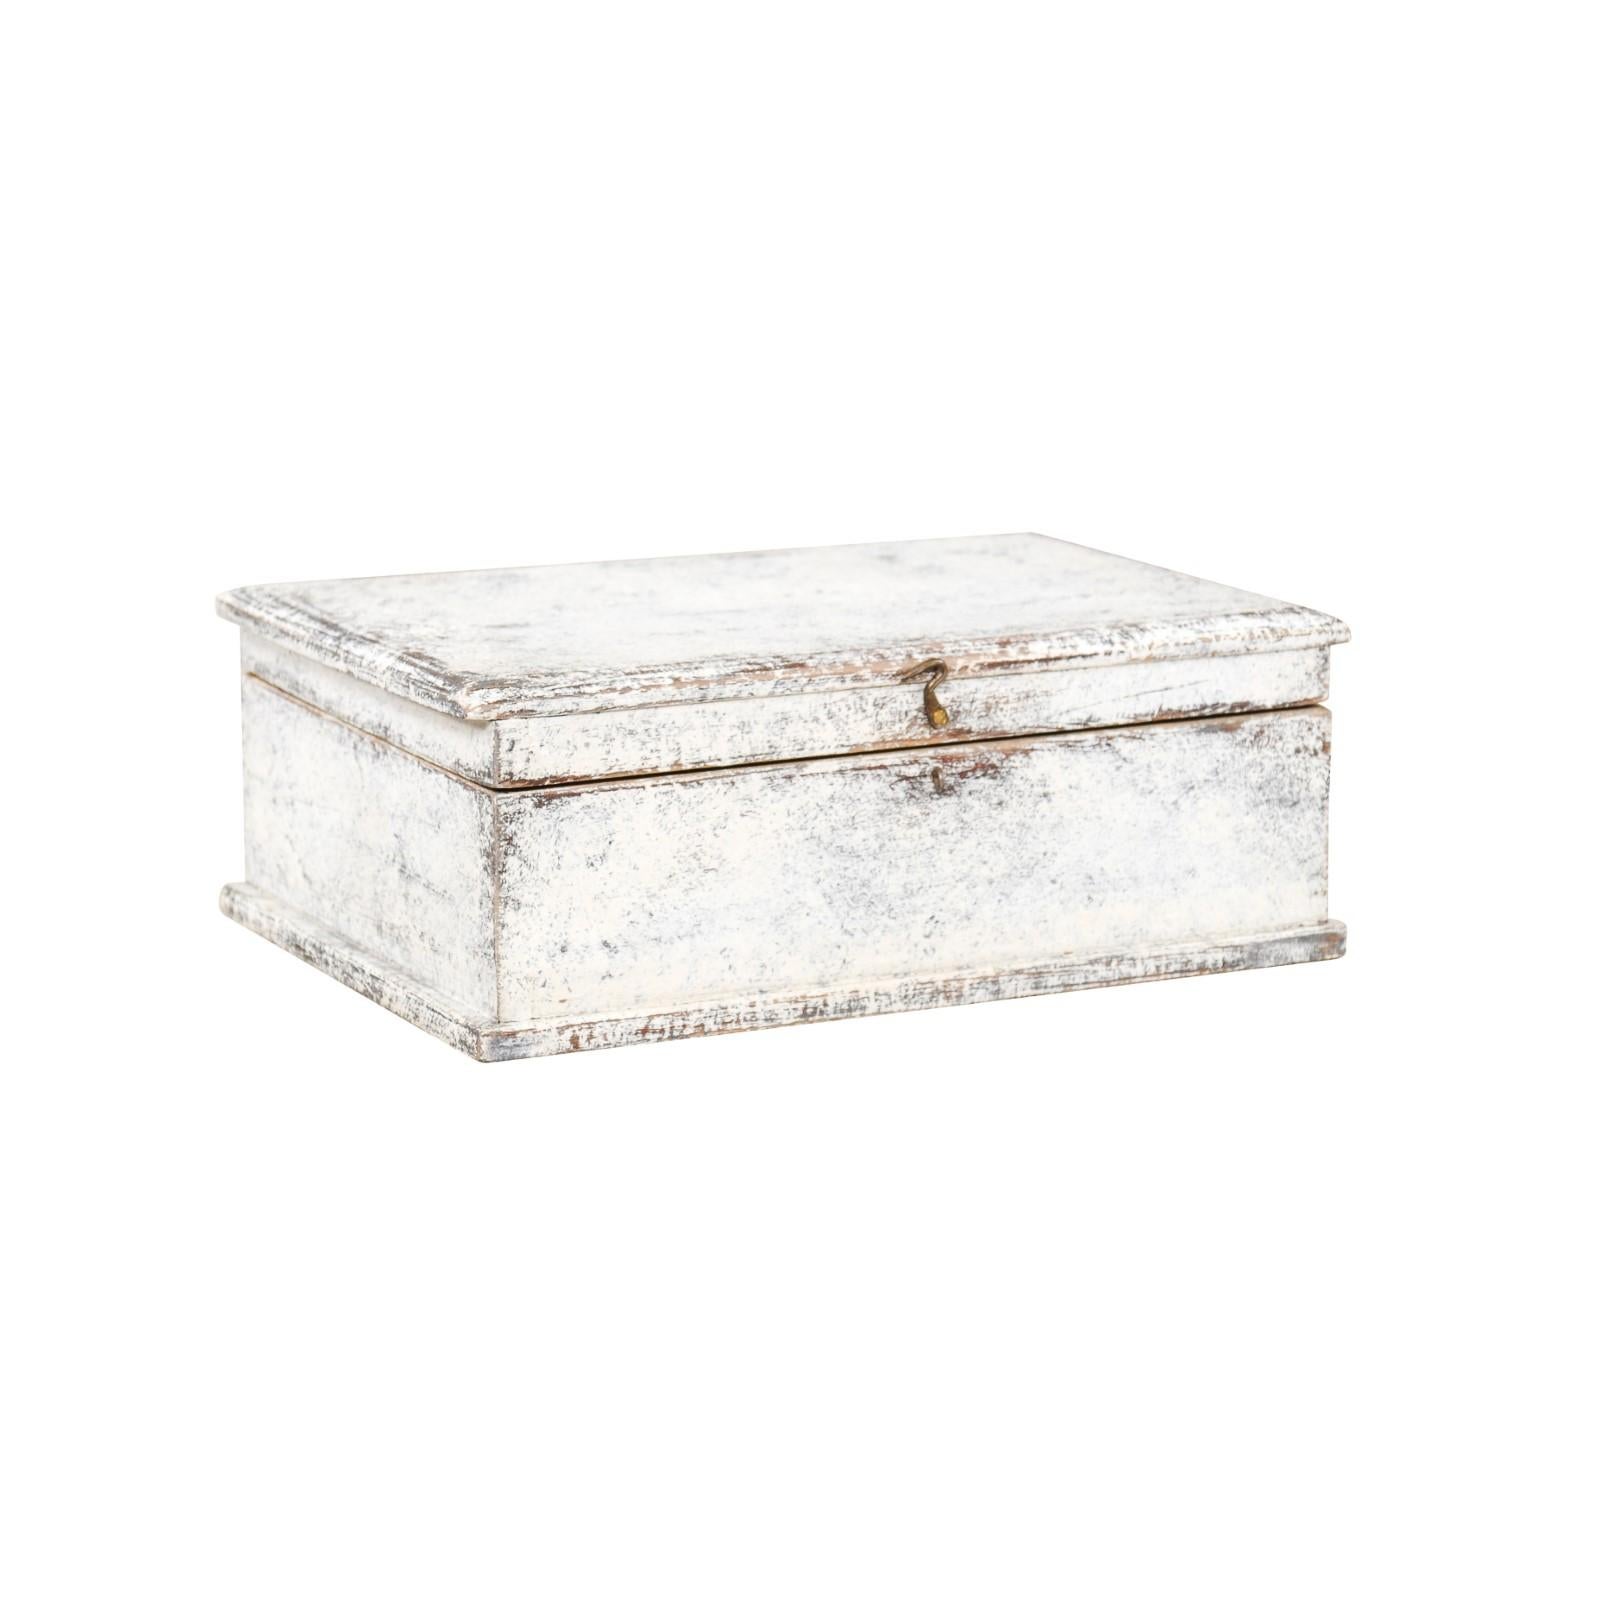 A Swedish Turn of the Century Period painted wood box from the early 20th century, with brass hook, distressed finish and natural interior. Created in Sweden at the Turn of the Century which saw the transition between the 19th to the 20th, this